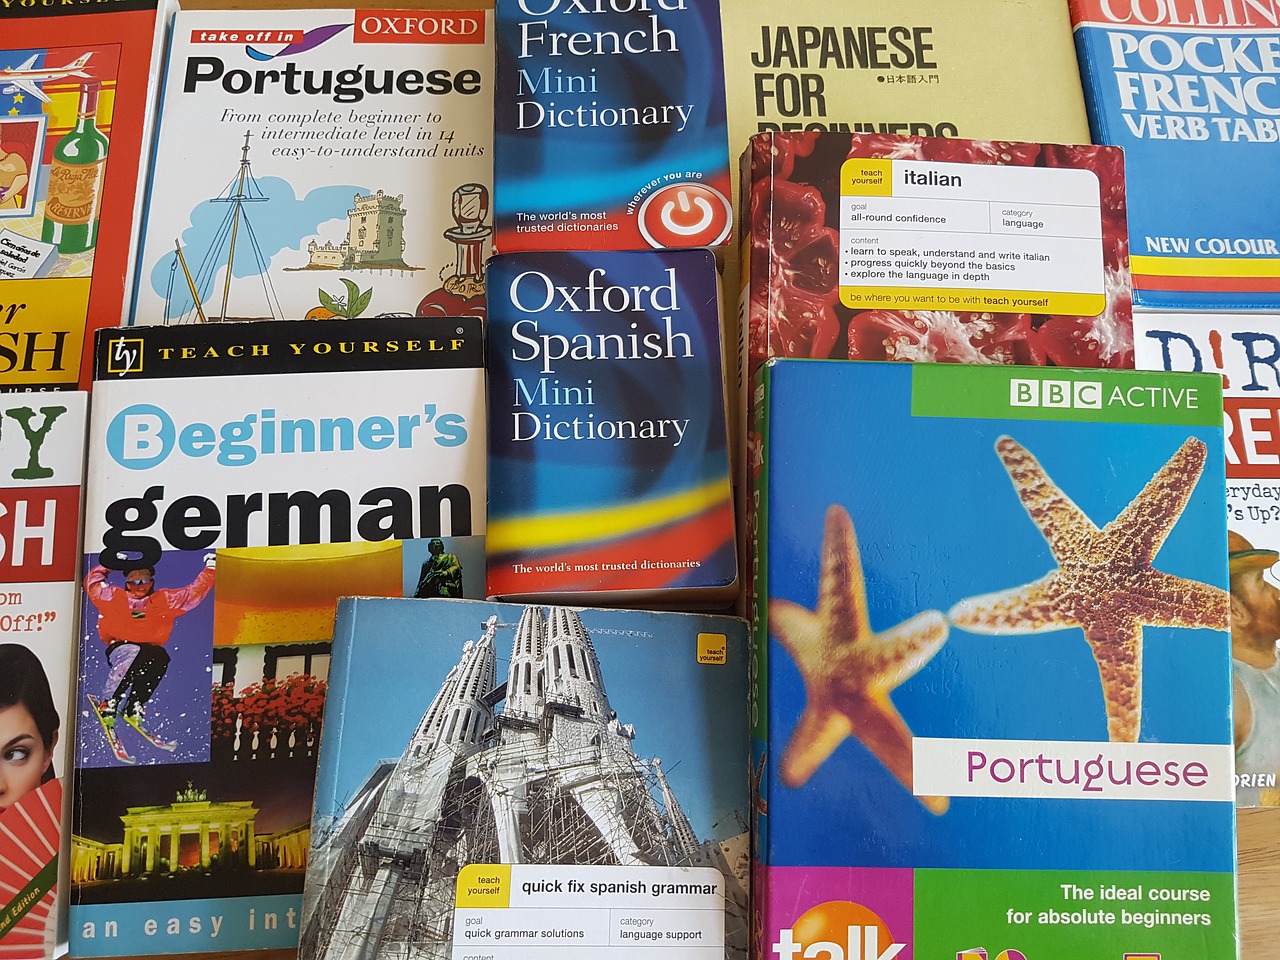 business languages, best languages to learn for business, best languages for business, most useful languages for business, most used languages in business, which language should i learn for business, useful languages for business, most iportant languages, business language, best languages to learn for business 2017, what language should i learn for international business, important languages to learn for business, top 5 business languages, business language of the world, most popular business languages, most in demand languages, most common language in the world, most usefl languages, language of business, what is the business language, most used languages in business, official business language of the world, most important languages, what is the internaitonal language of business, what is the most spoken language, top 5 most useful languages, what is the most widely spoken language in the world, most useful languaes to learn, most used language in the world, the most useful, 10 most useful languages, most widely spoken languages, most used languges, what is the most spokeen language in the world, which language should i learn for business, what is the best foreign language to learn for business, top languages to learn for international business, important languages to learn for business, best foreign language to learn for business,